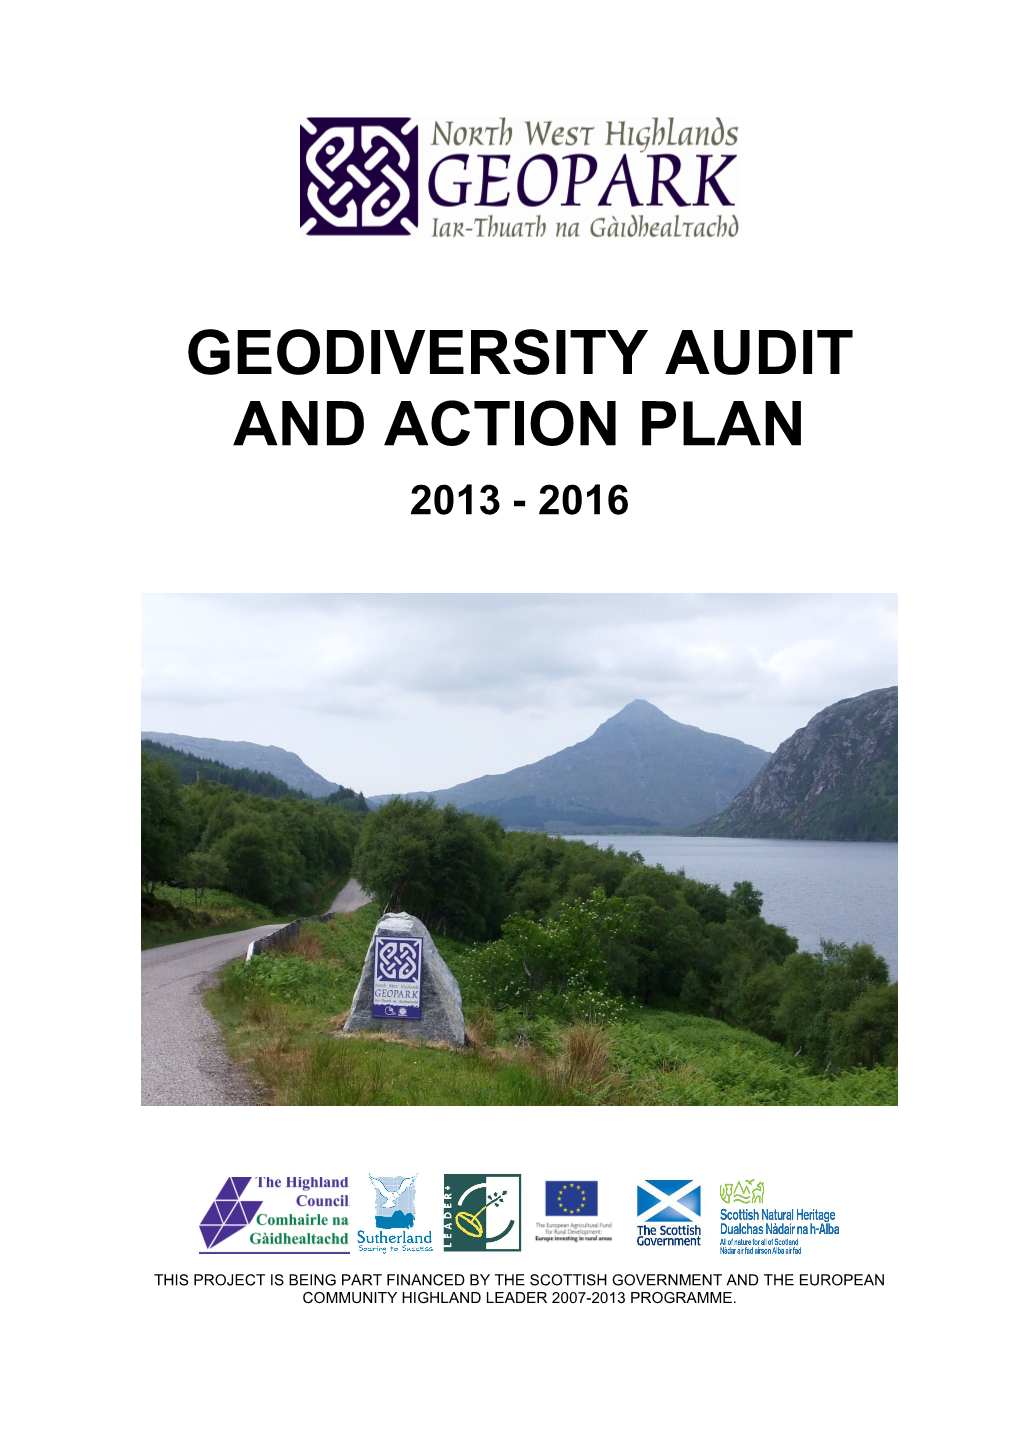 Geodiversity Audit and Action Plan 2013 - 2016